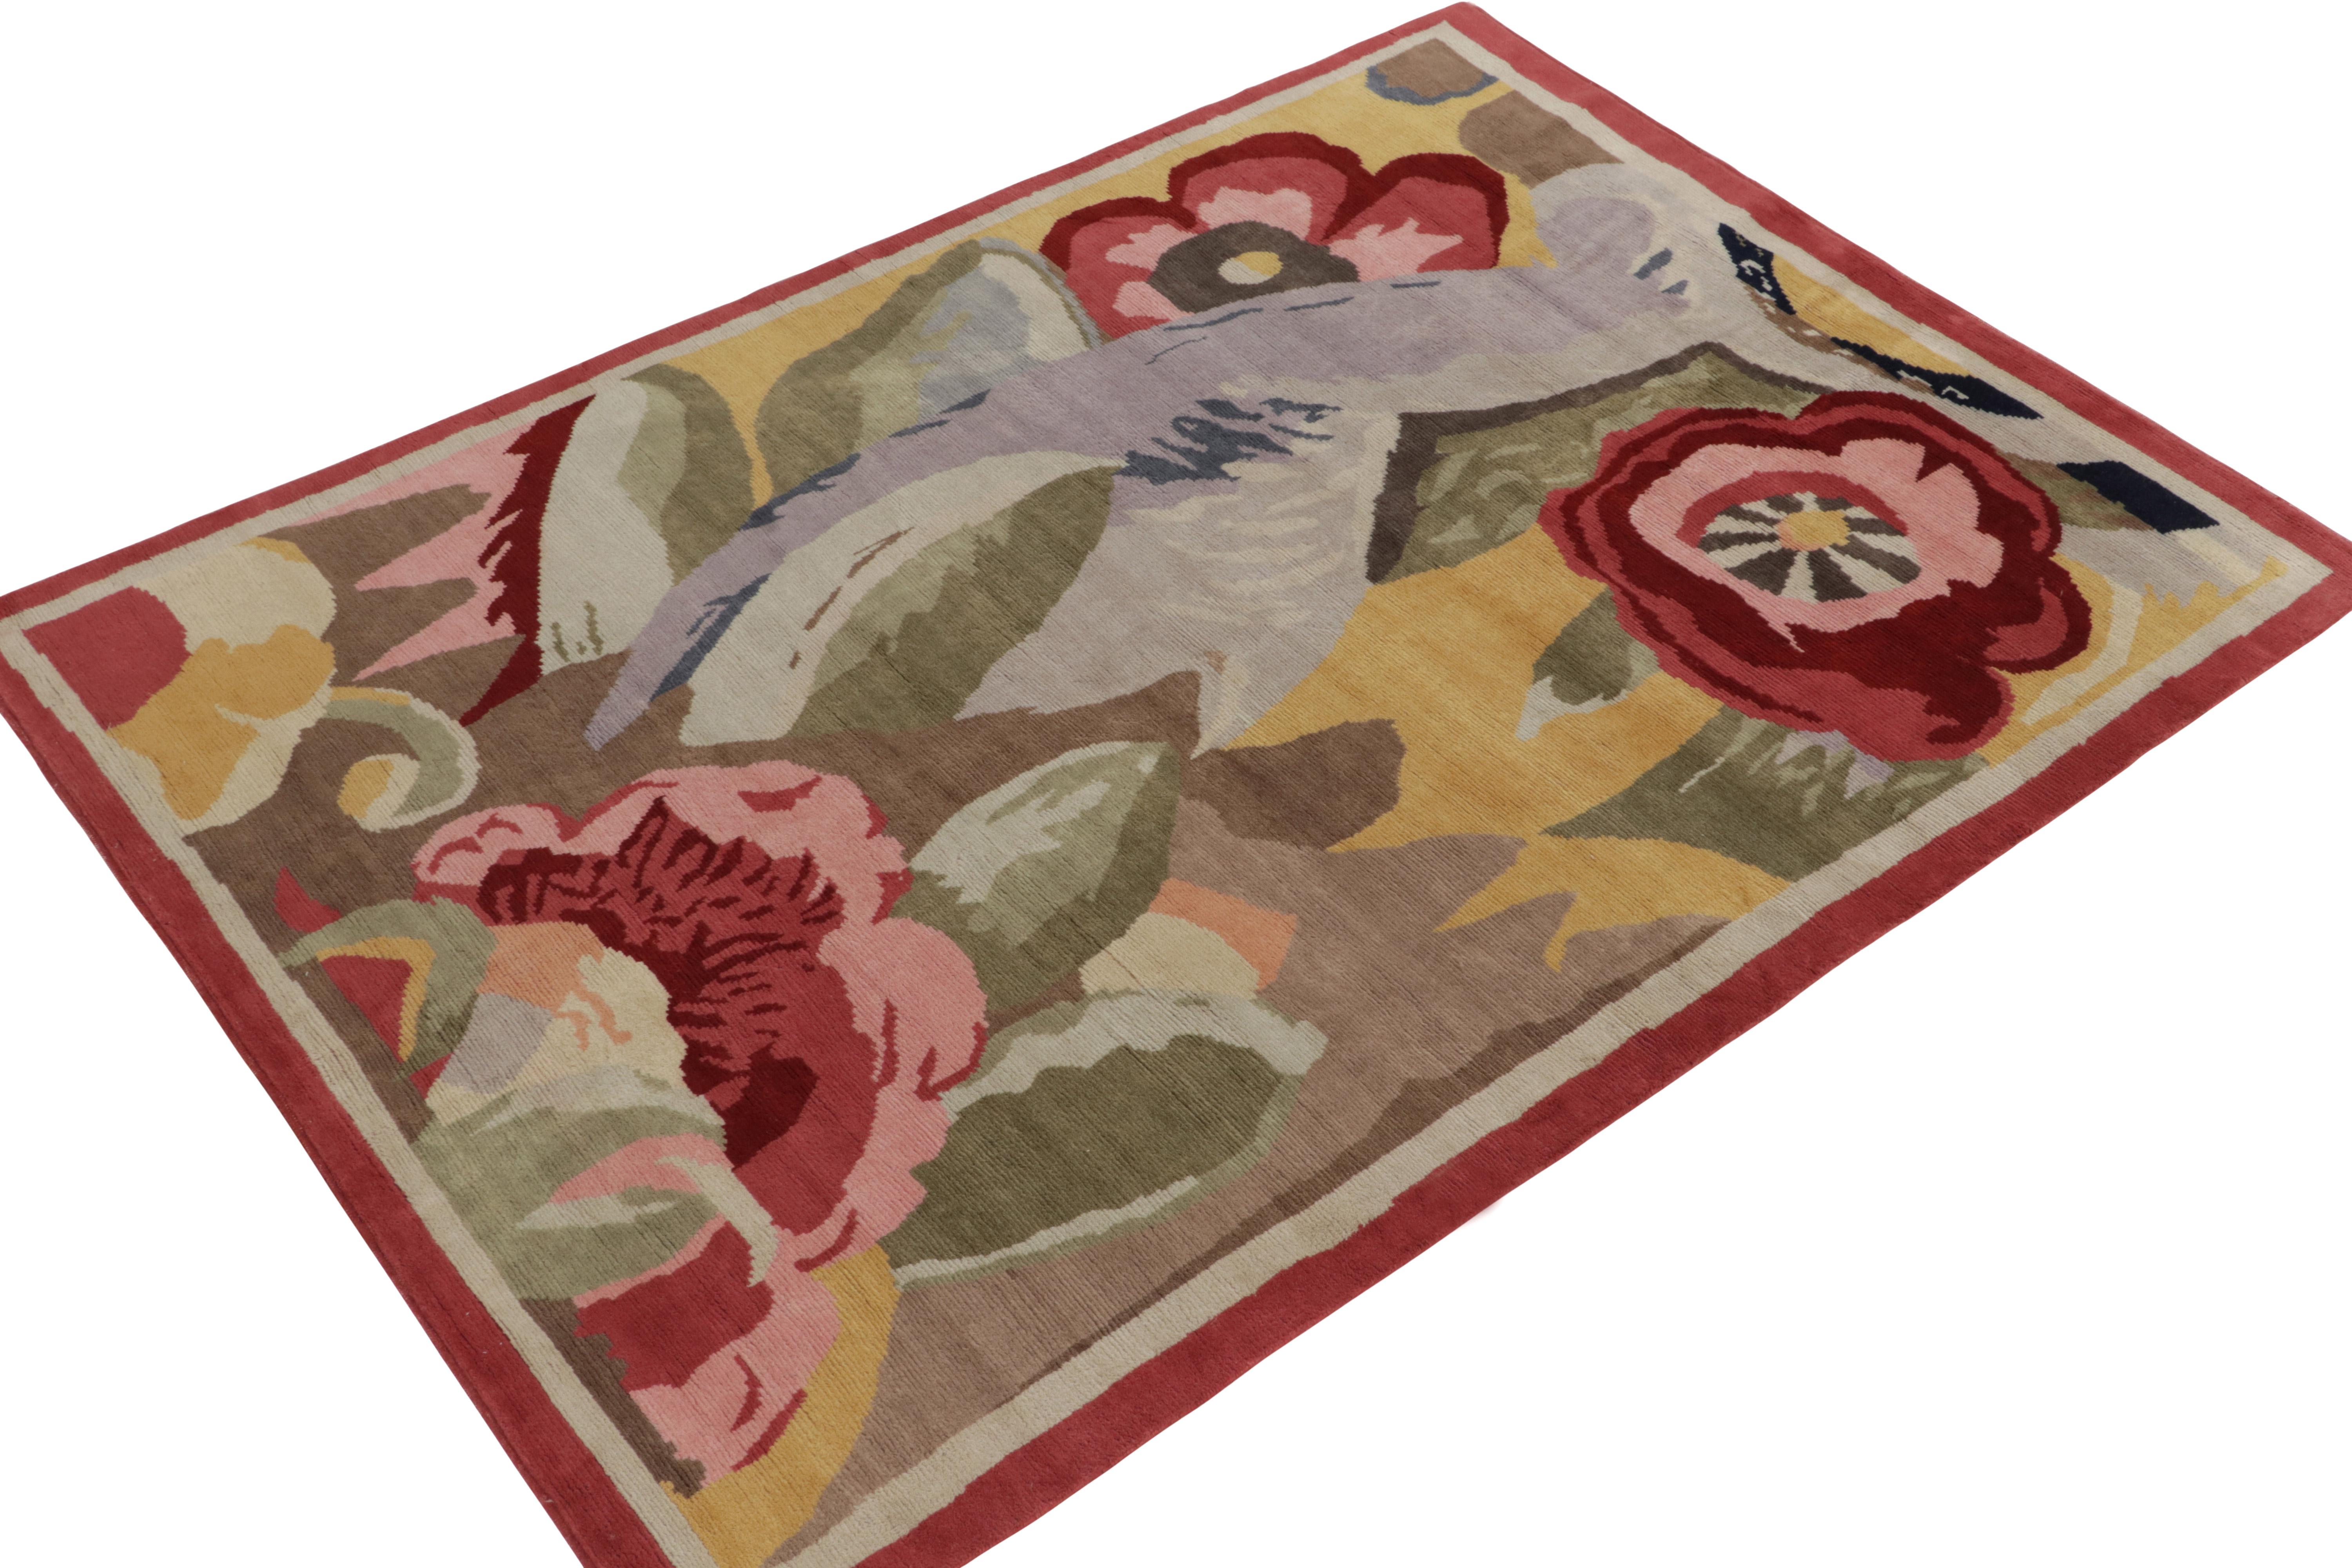 Hand-knotted in wool, a 7x10 piece from the inspired new French Deco Collection by Rug & Kilim. Particularly inspired by unusual European impressionist styles, the abstract drawing revels in a bold floral pattern relishing tones of brown, red &